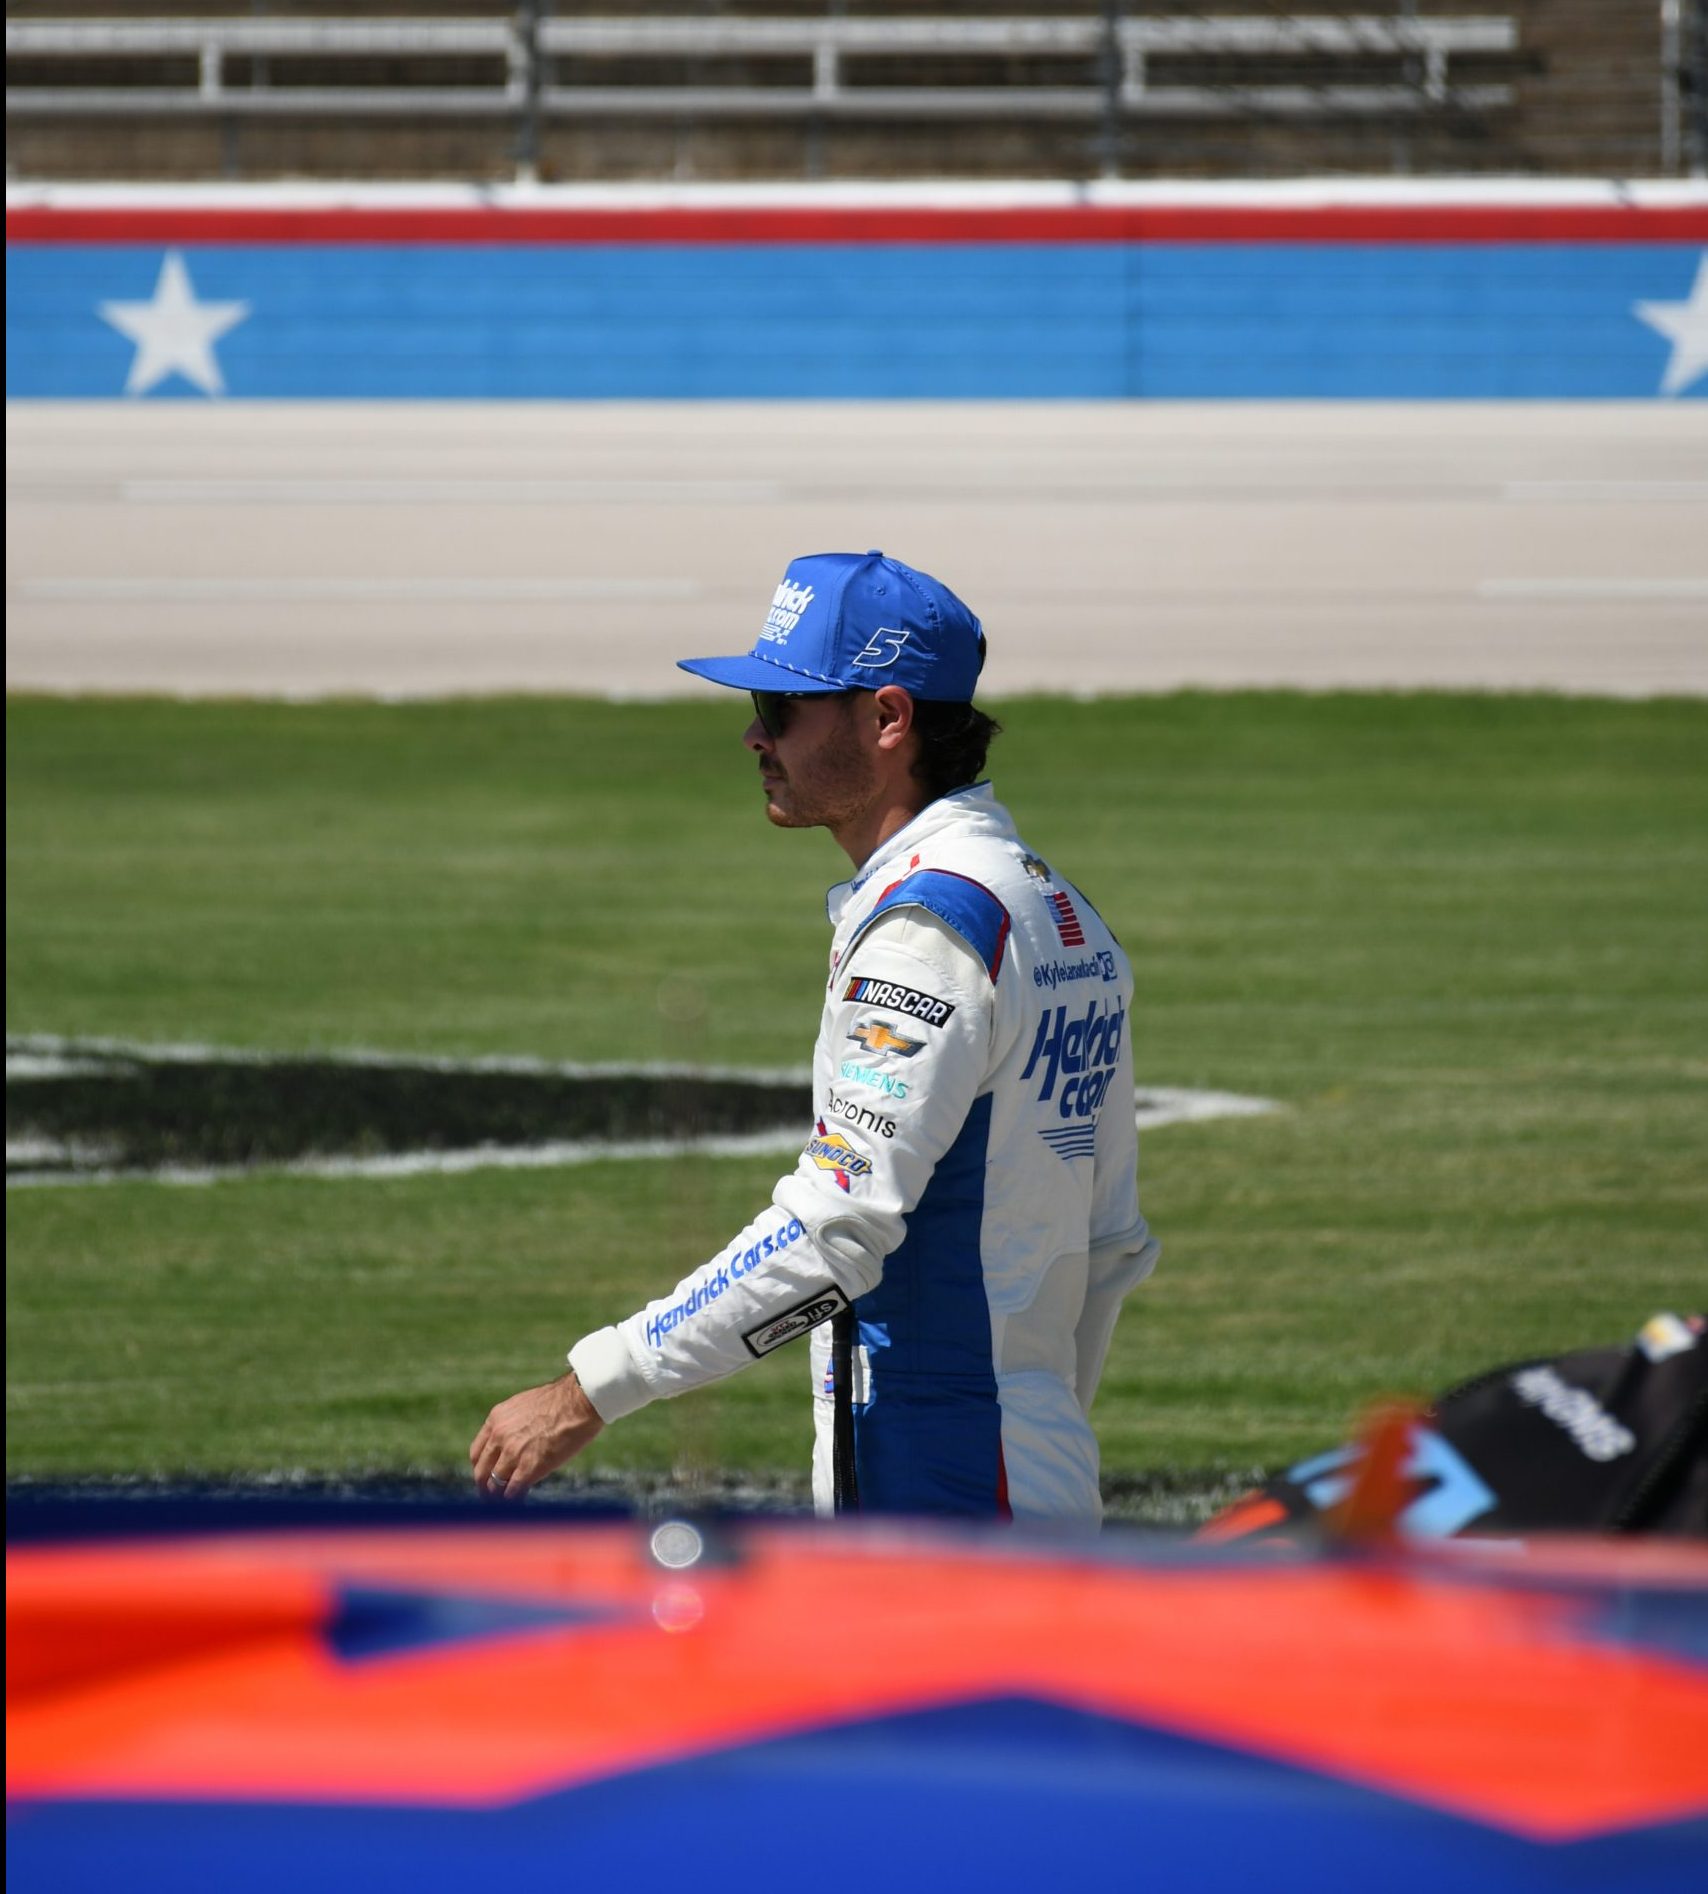 While Kyle Larson may have his reservations about superspeedway racing, he was a strong contender during Talladega's spring race earlier this year. (Photo: John Arndt | r/NASCAR)